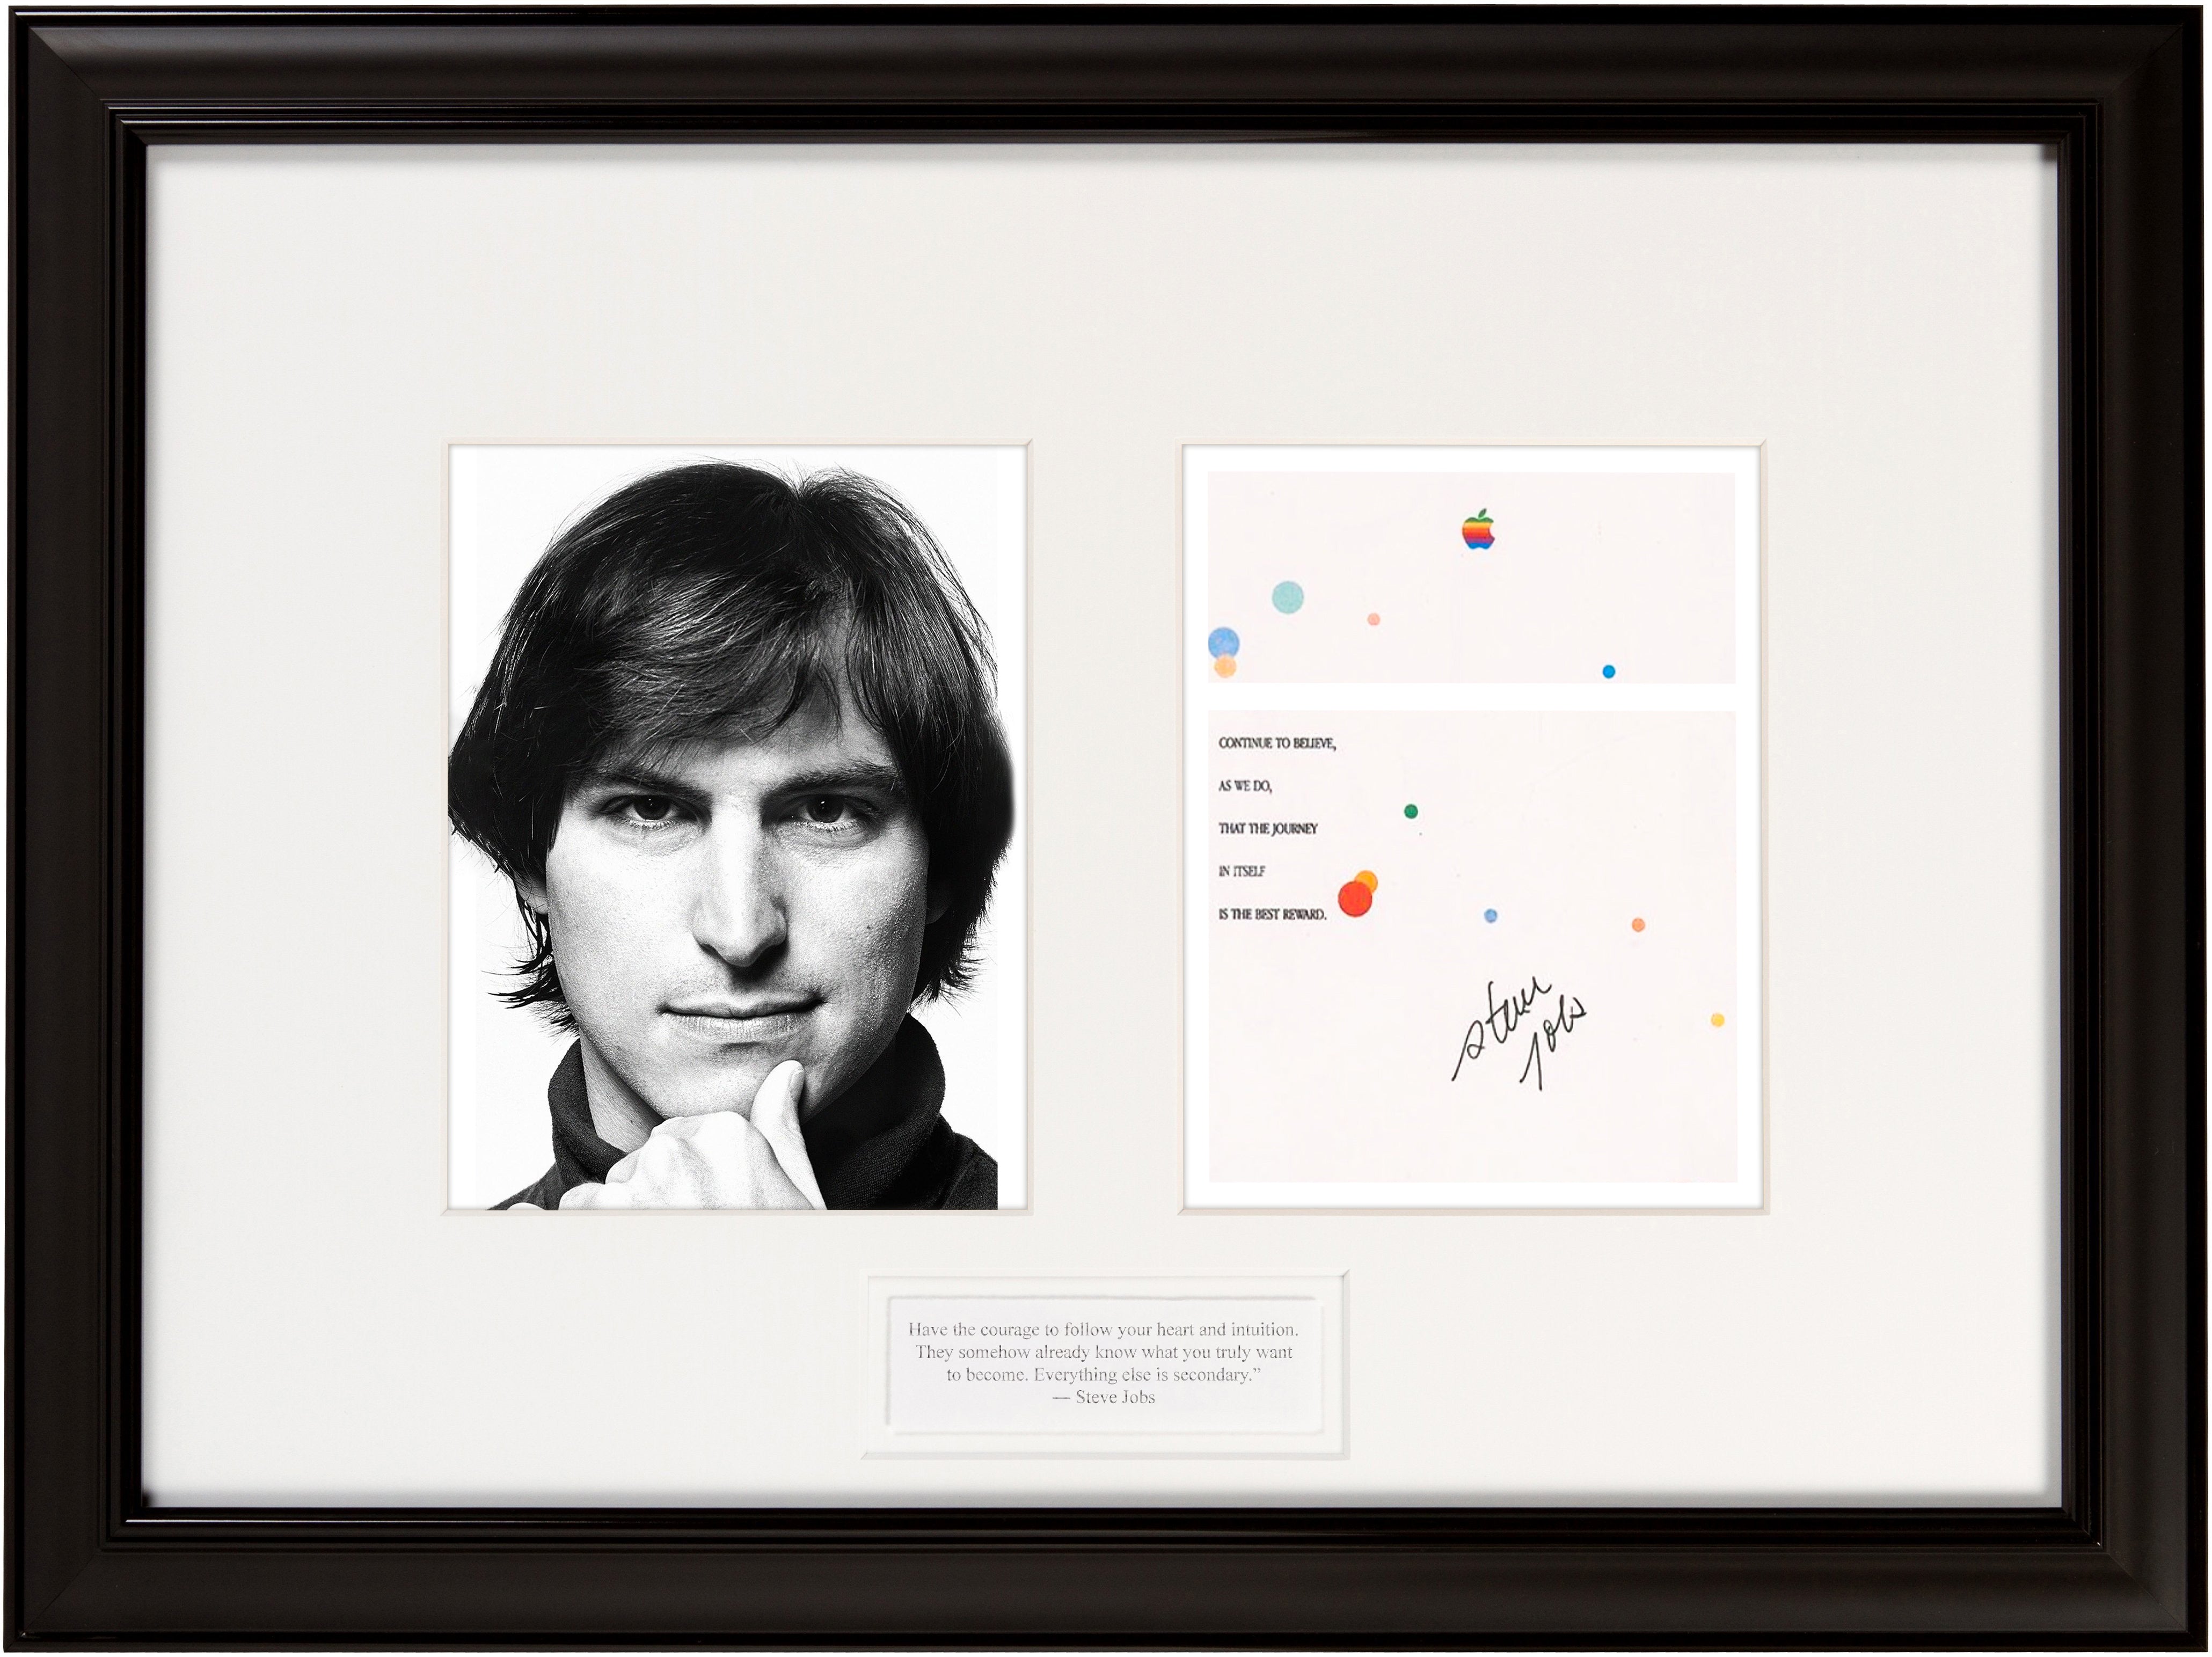 Rare Steve Jobs Signed(only Steve Jobs available in the world.) “Continue to believe as we do that the journey itself is the best reward.”